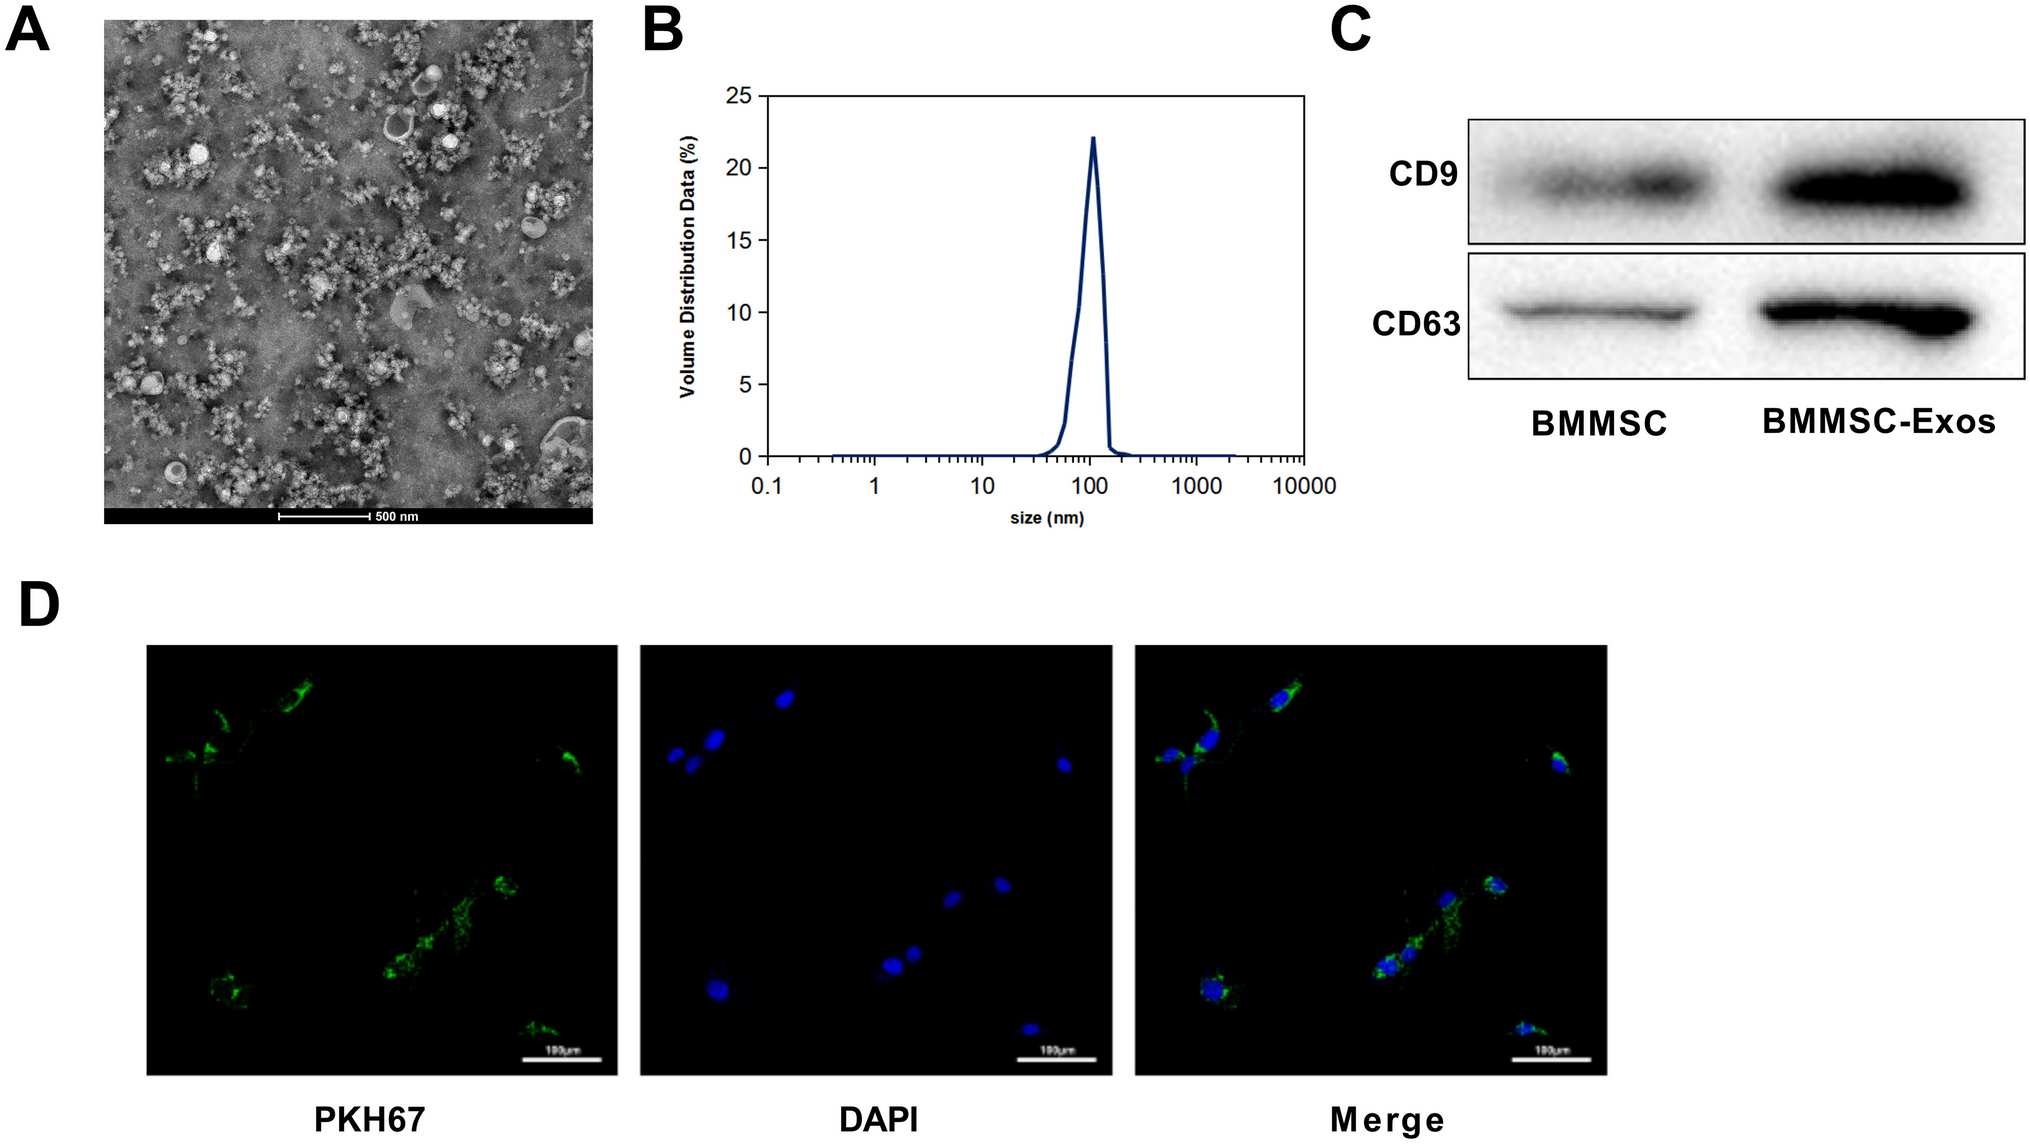 Bone Marrow Mesenchymal Stem Cell-Derived Exosomes Promote the Recovery of Spinal Cord Injury and Inhibit Ferroptosis by Inactivating IL-17 Pathway